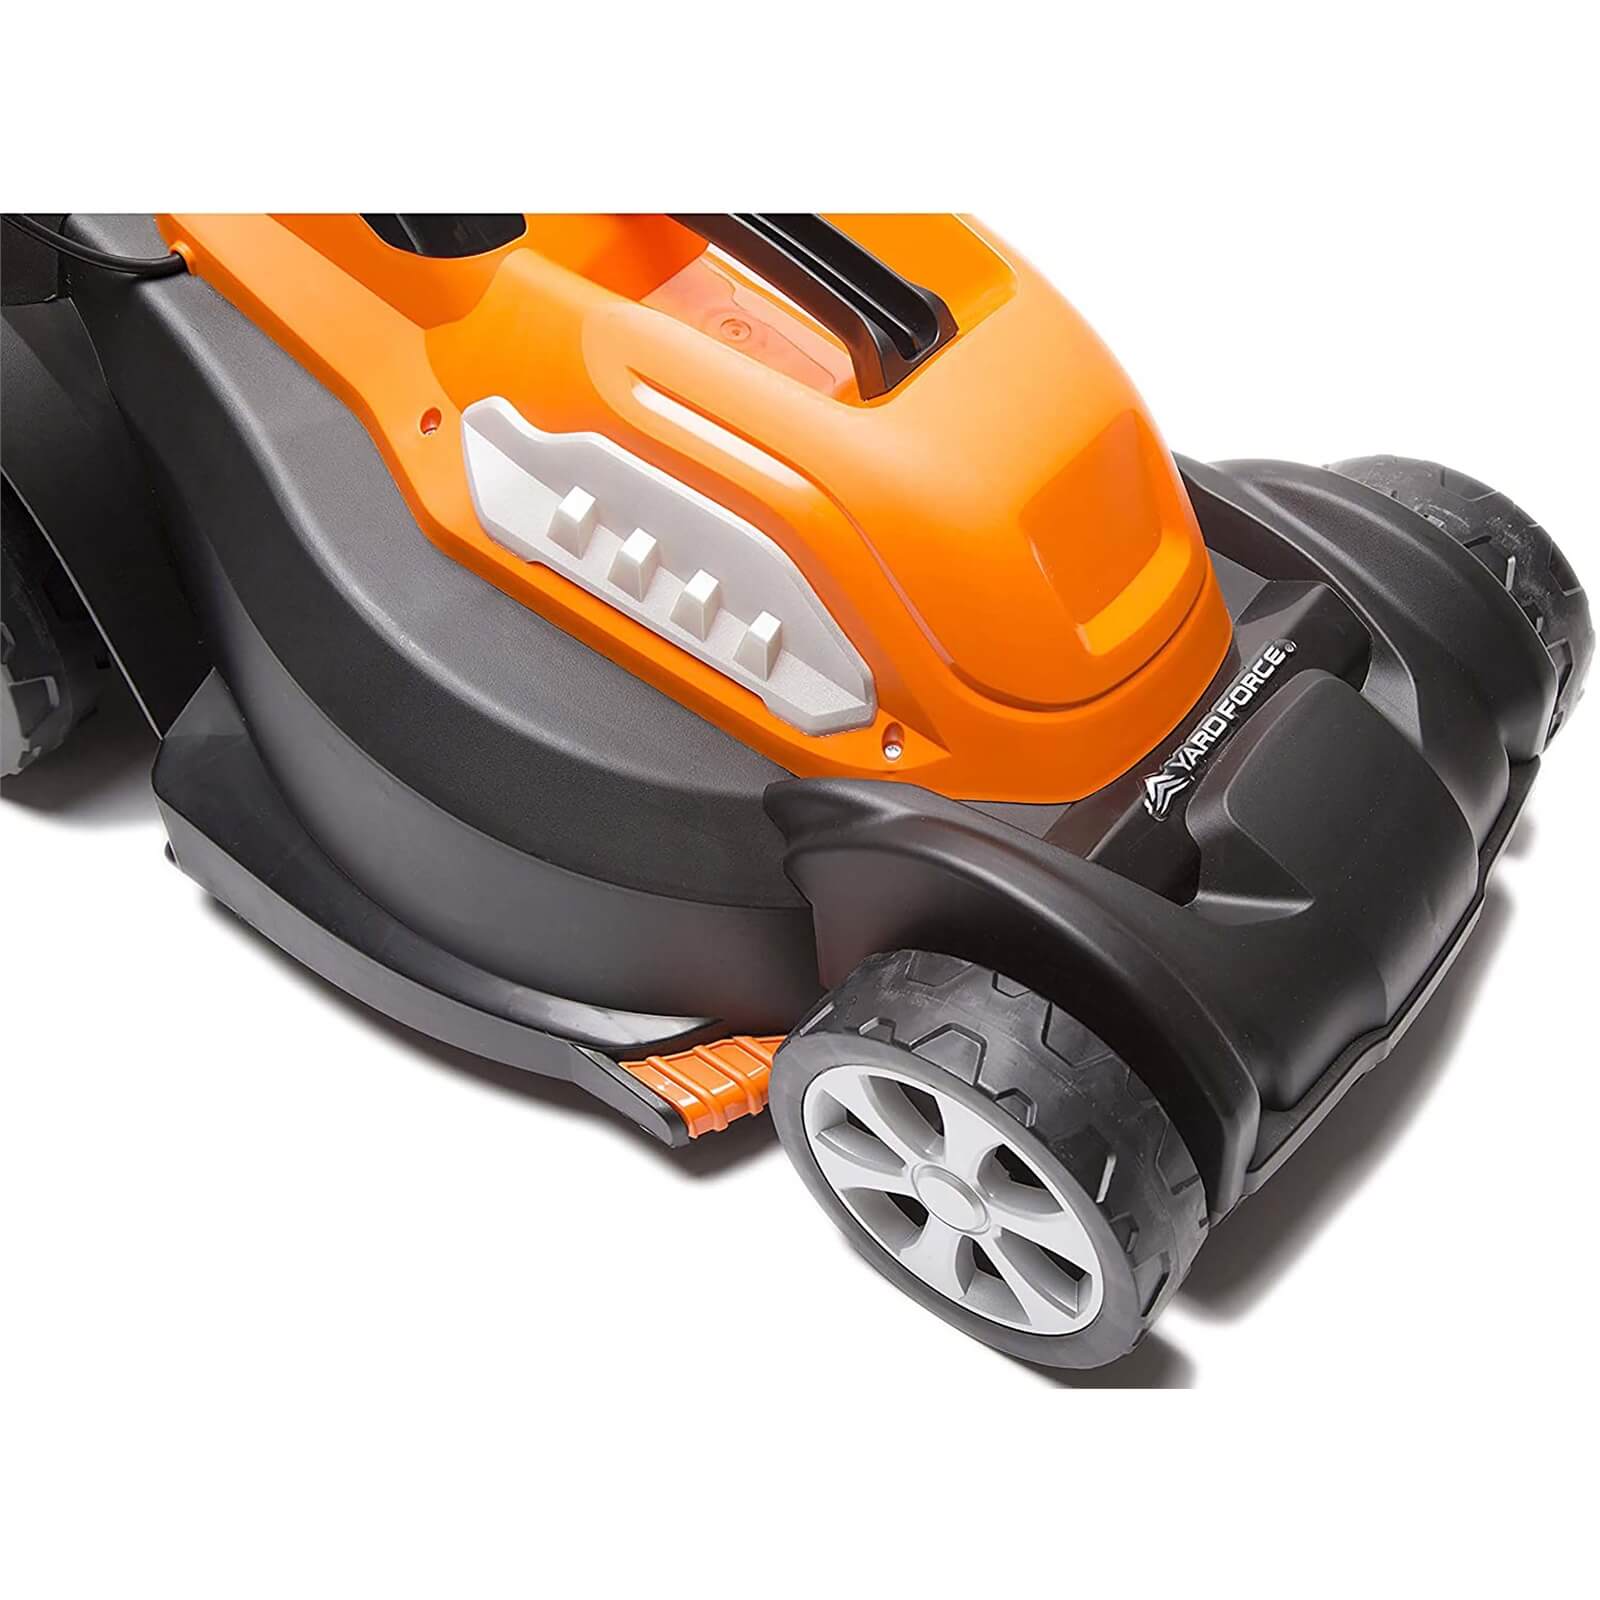 Yard Force 40V 37cm Cordless Lawnmower with 2.5AH Lithium-ion Battery & Quick Charger